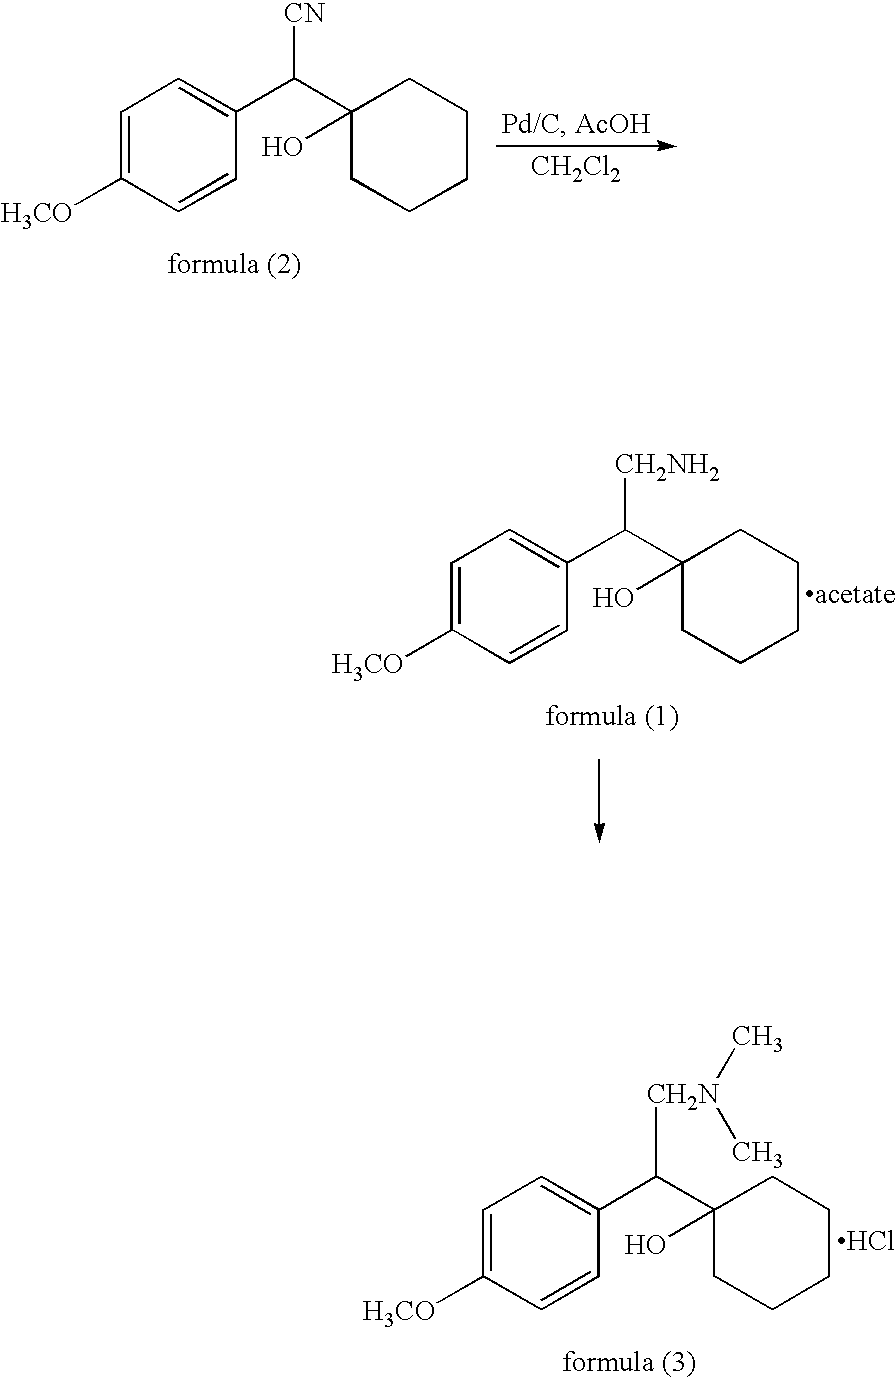 Process for the preparation of phenethylamine derivative, an intermediate of Venlafaxine hydrochloride